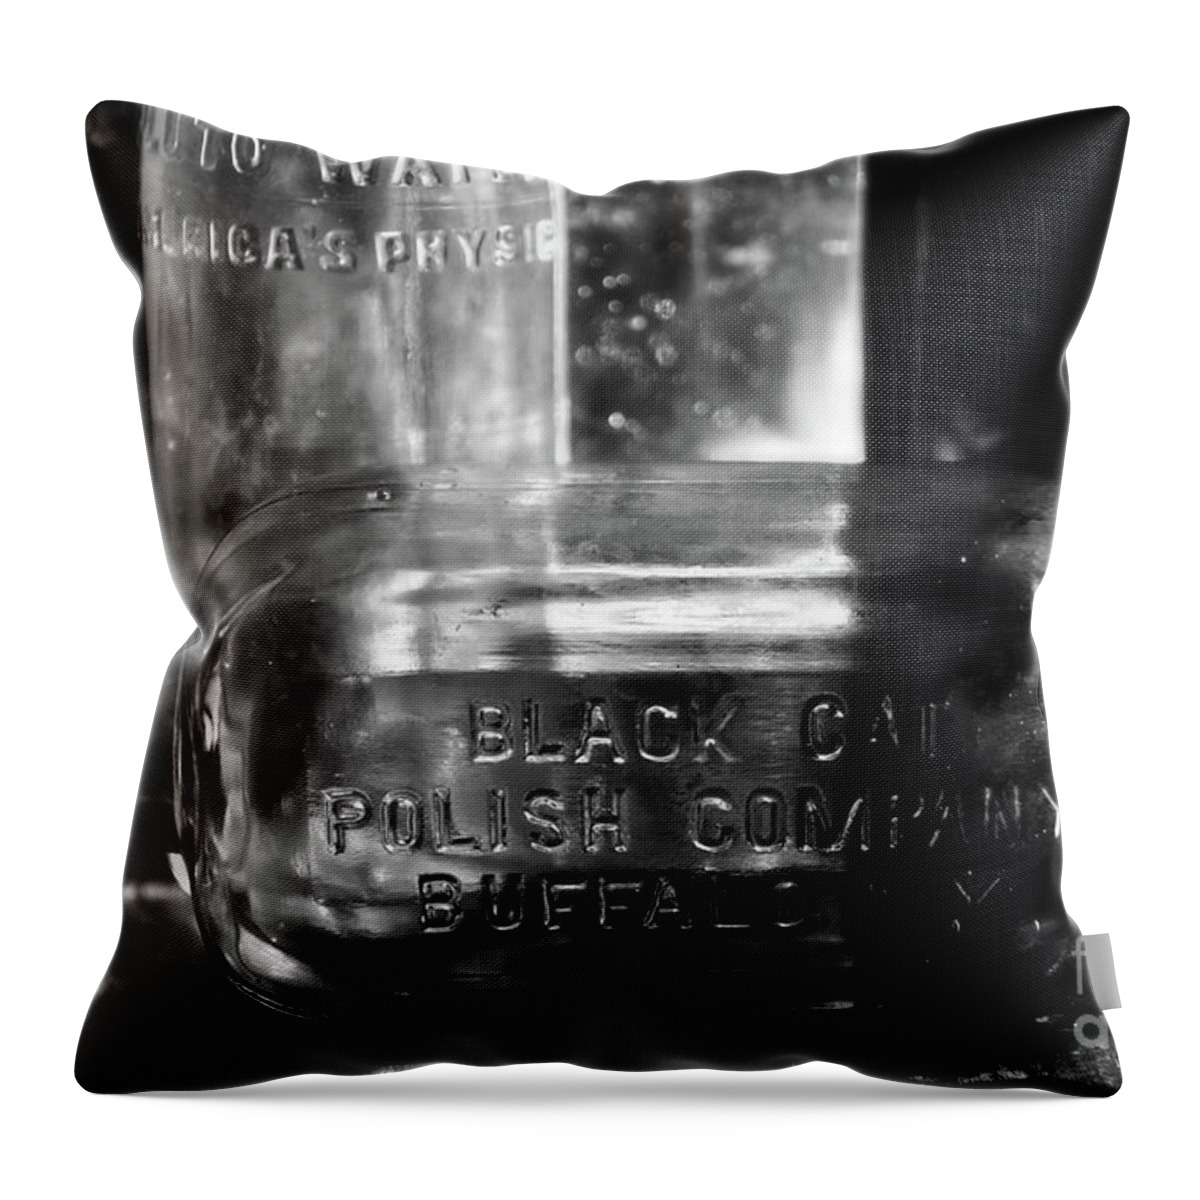 Bottles Throw Pillow featuring the photograph Black And White Bottles by Phil Perkins